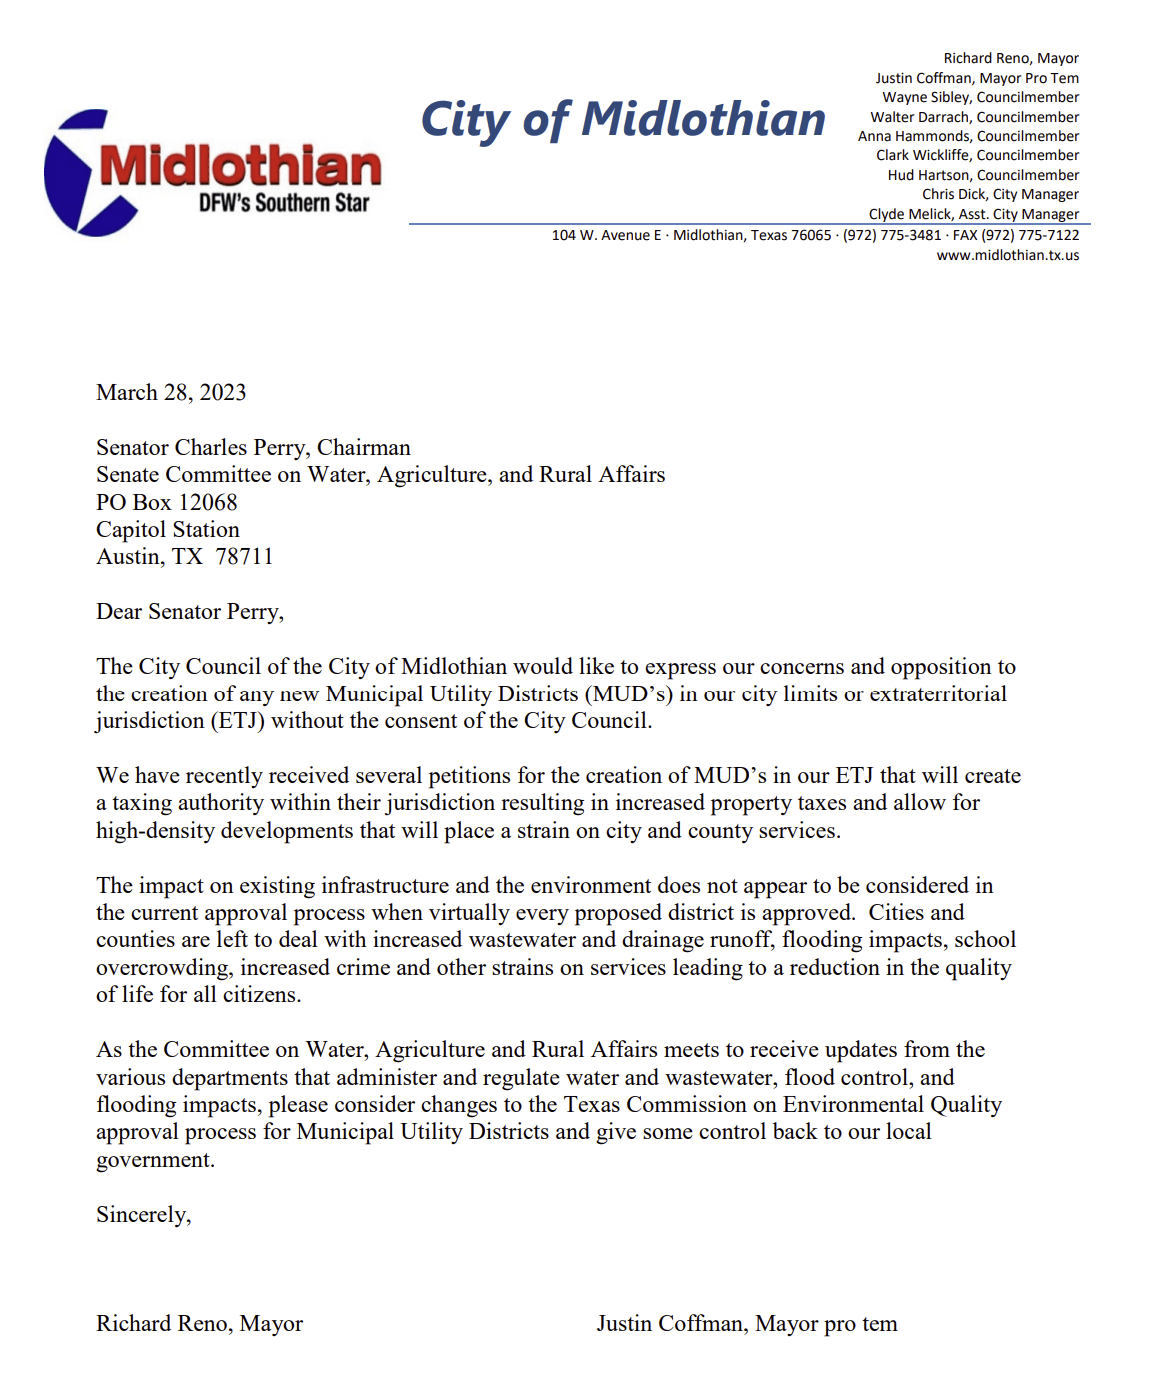 letter from Midlothian City Council opposing MUDs